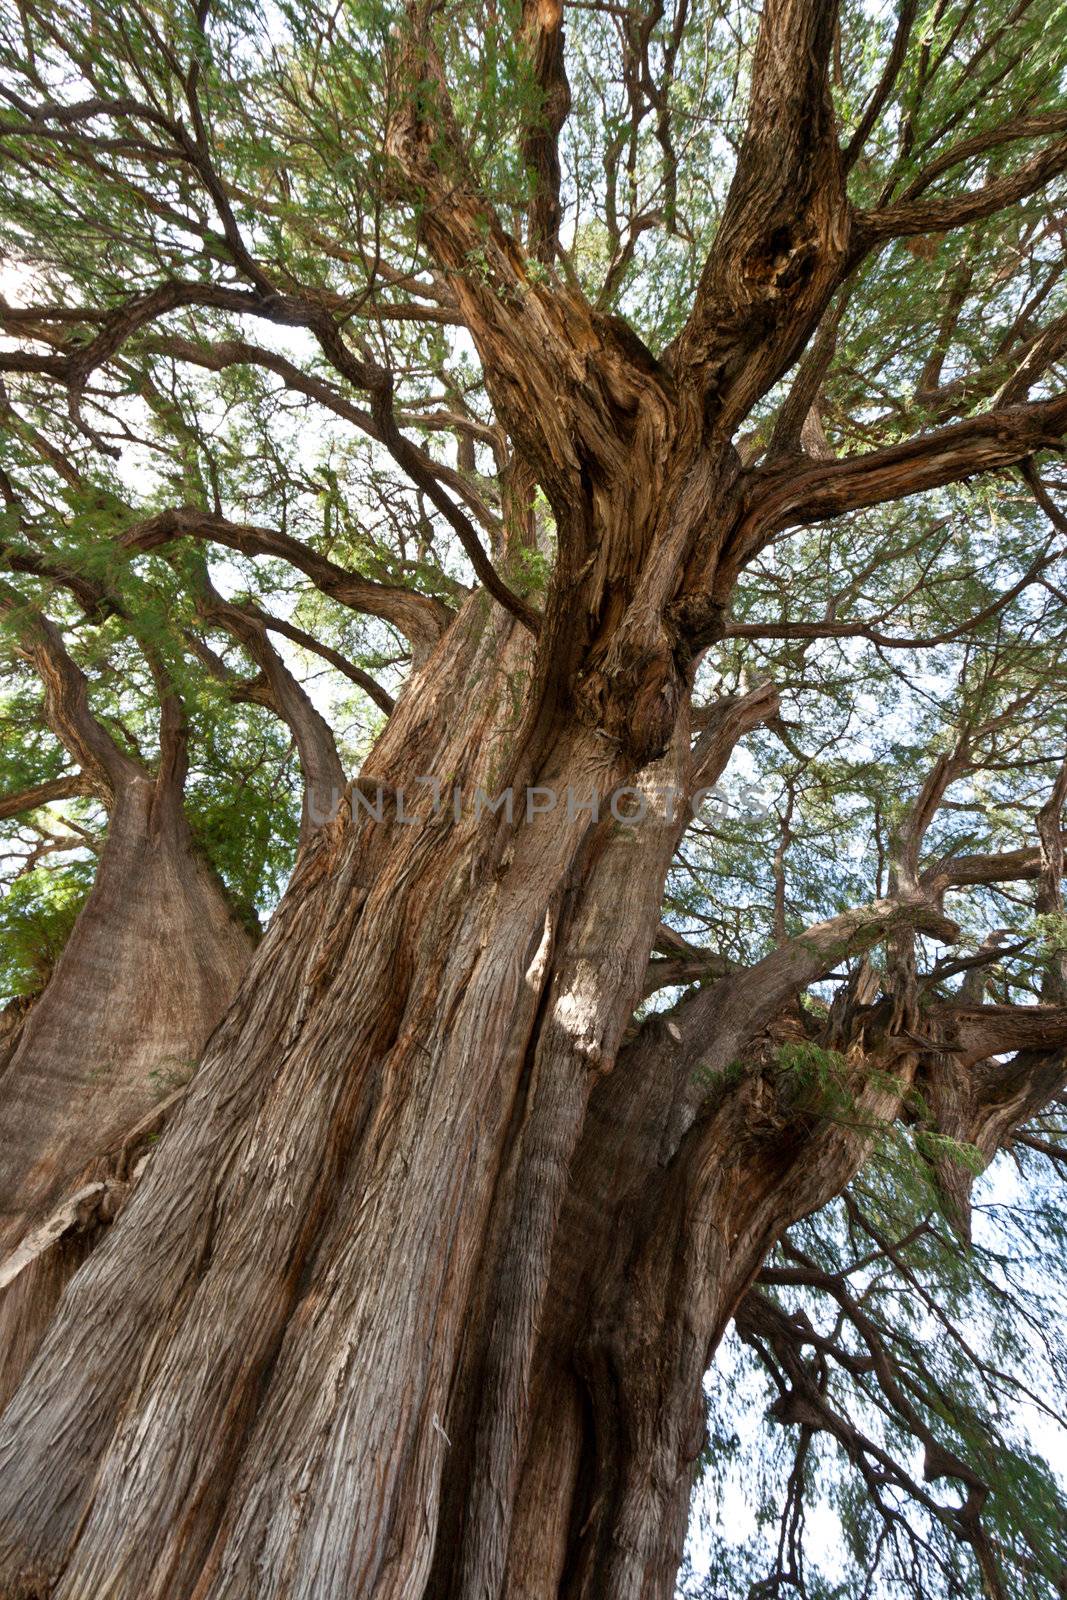 Tule tree in Mexico by dimol